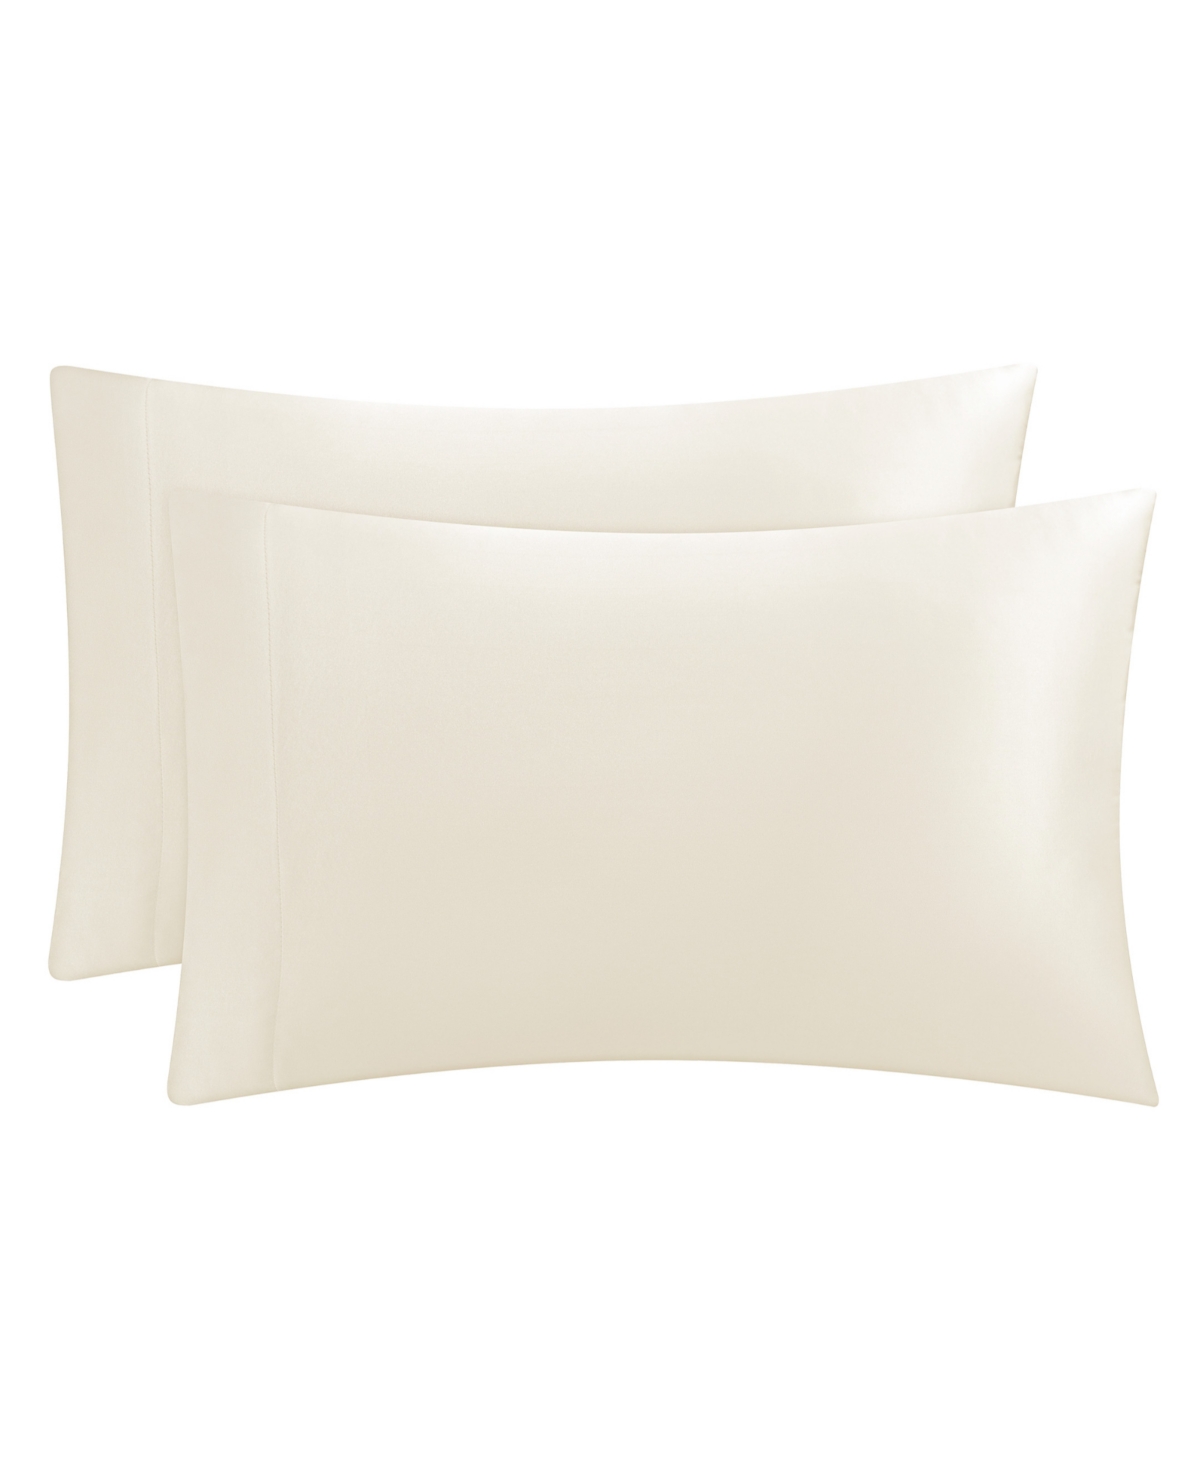 Juicy Couture Satin 2 Piece Pillow Case Set, Queen In Ivory